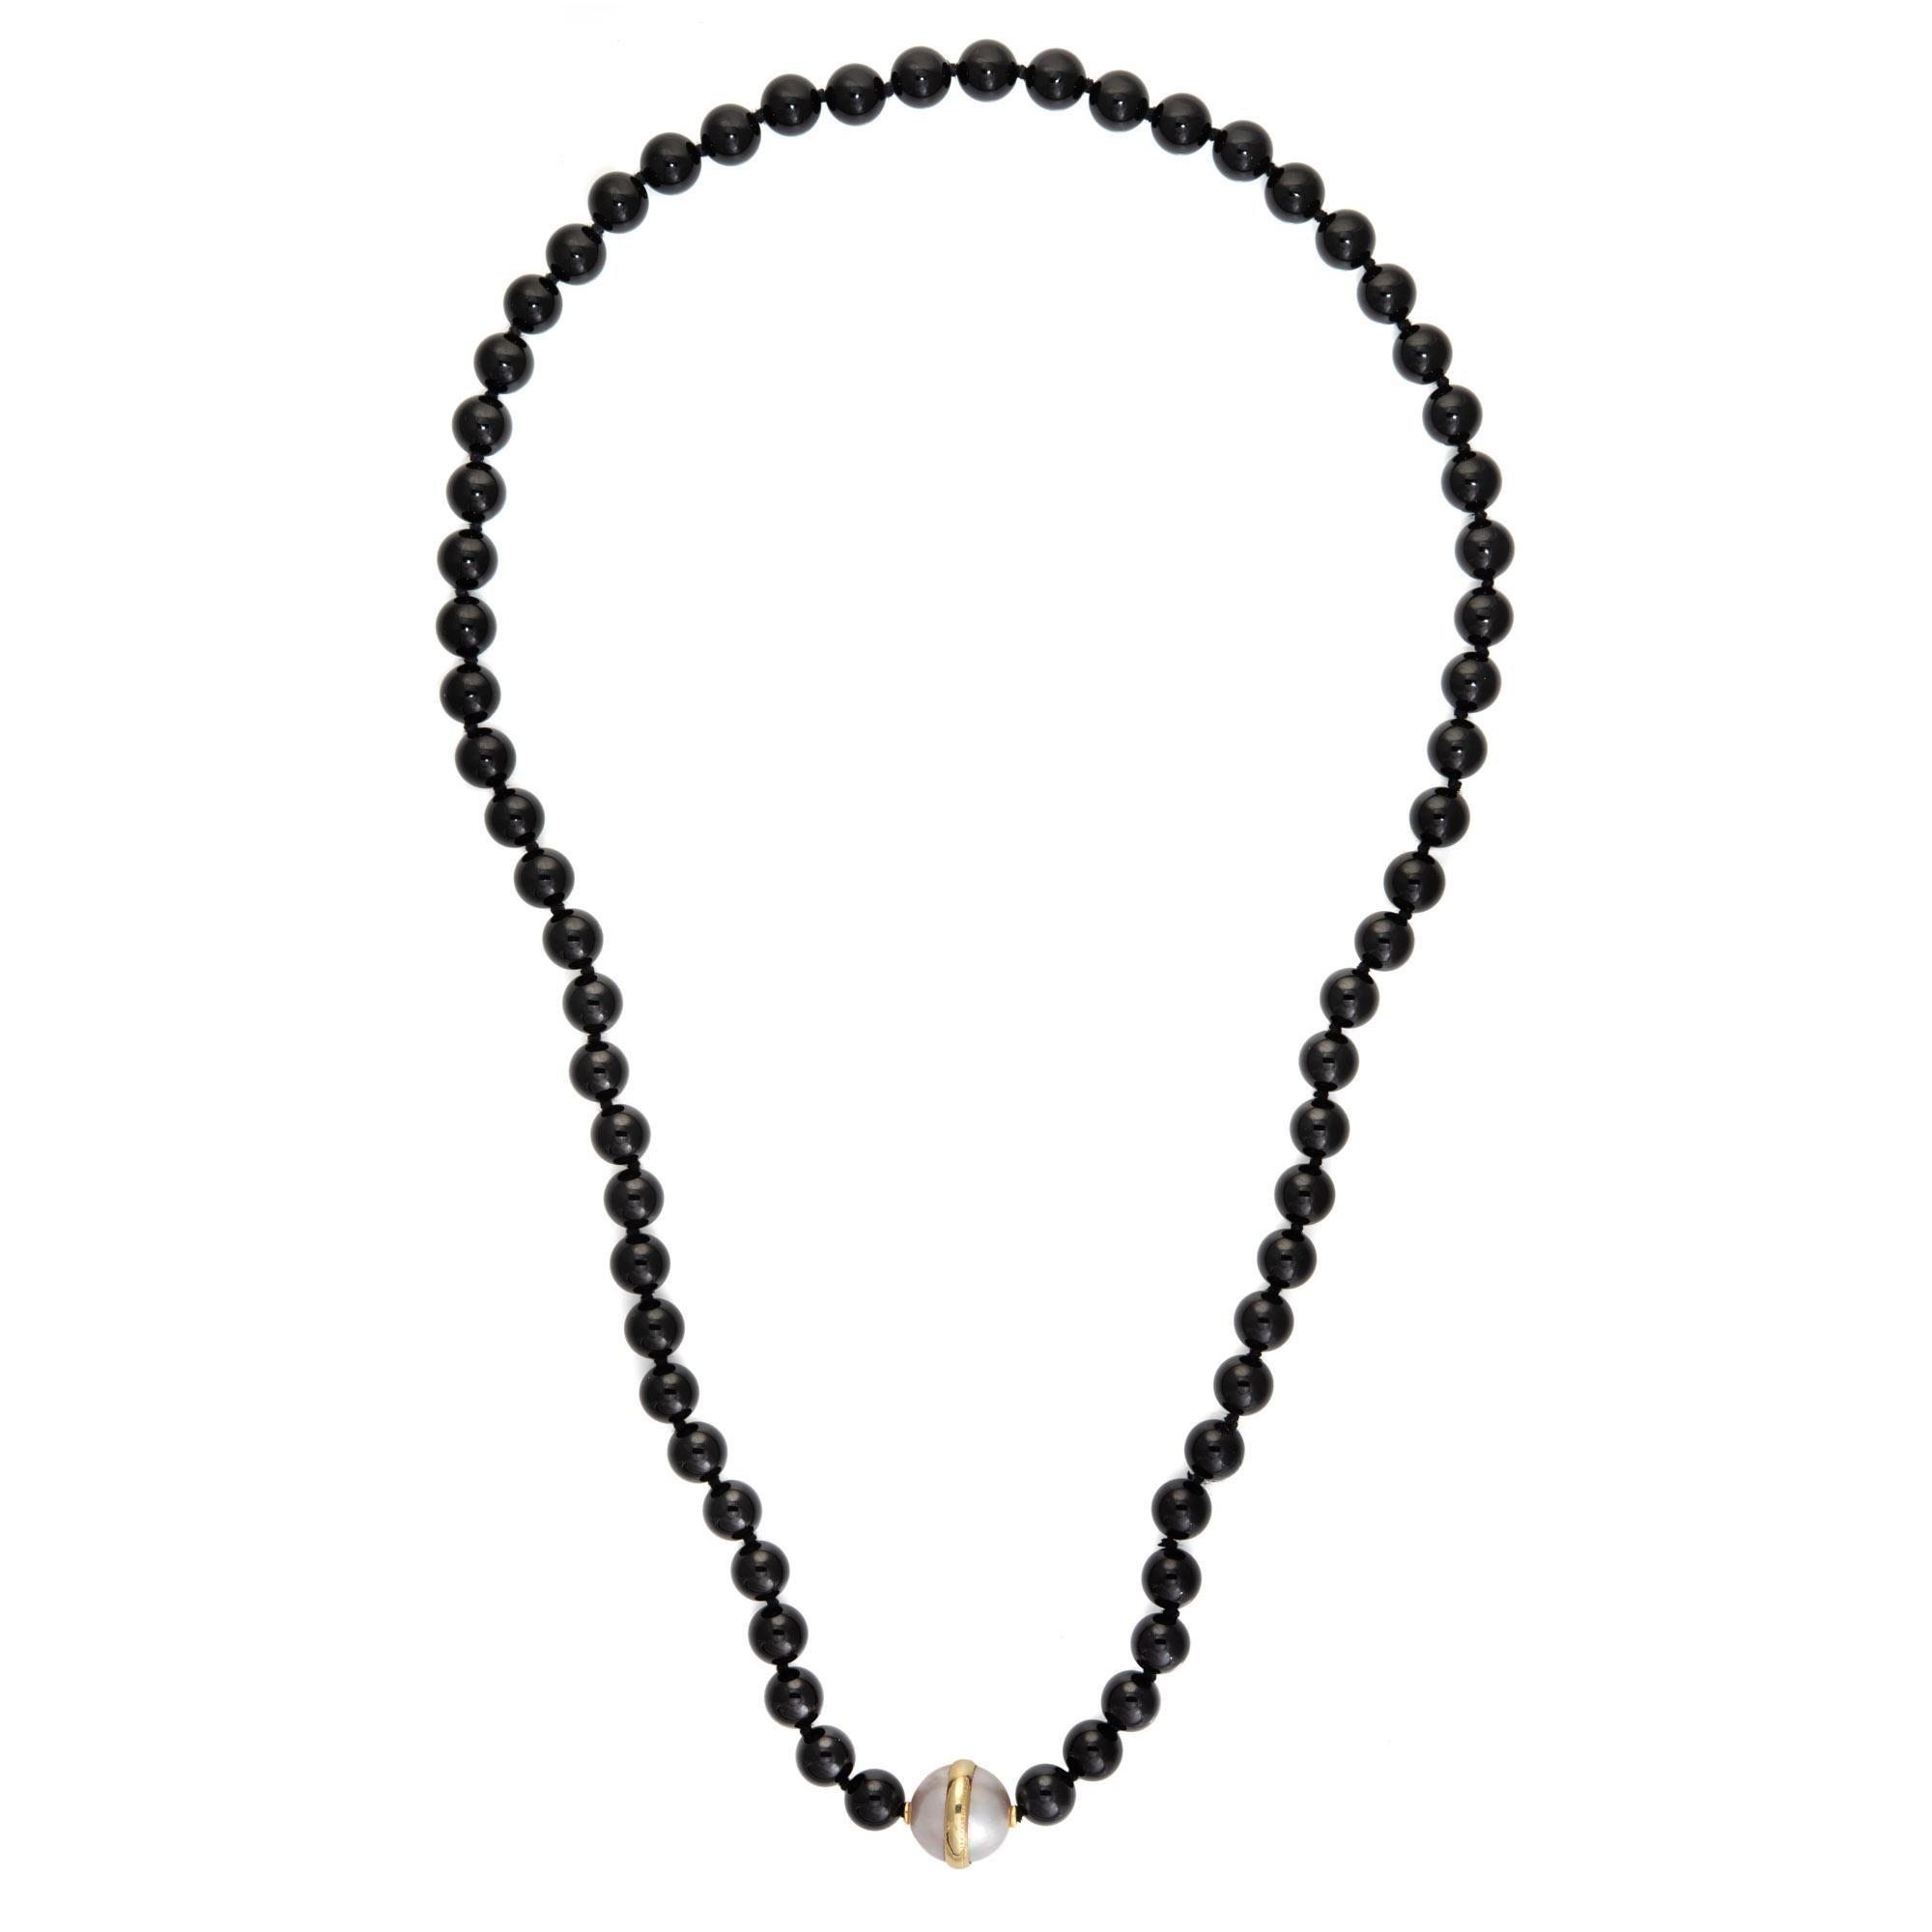 Stylish and finely detailed vintage Tiffany & Co onyx & pearl necklace, crafted in 18k yellow gold (circa 1981).  

Onyx beads are uniform in size and measure 12mm each. The stones are in very good condition and free of cracks or chips. One large